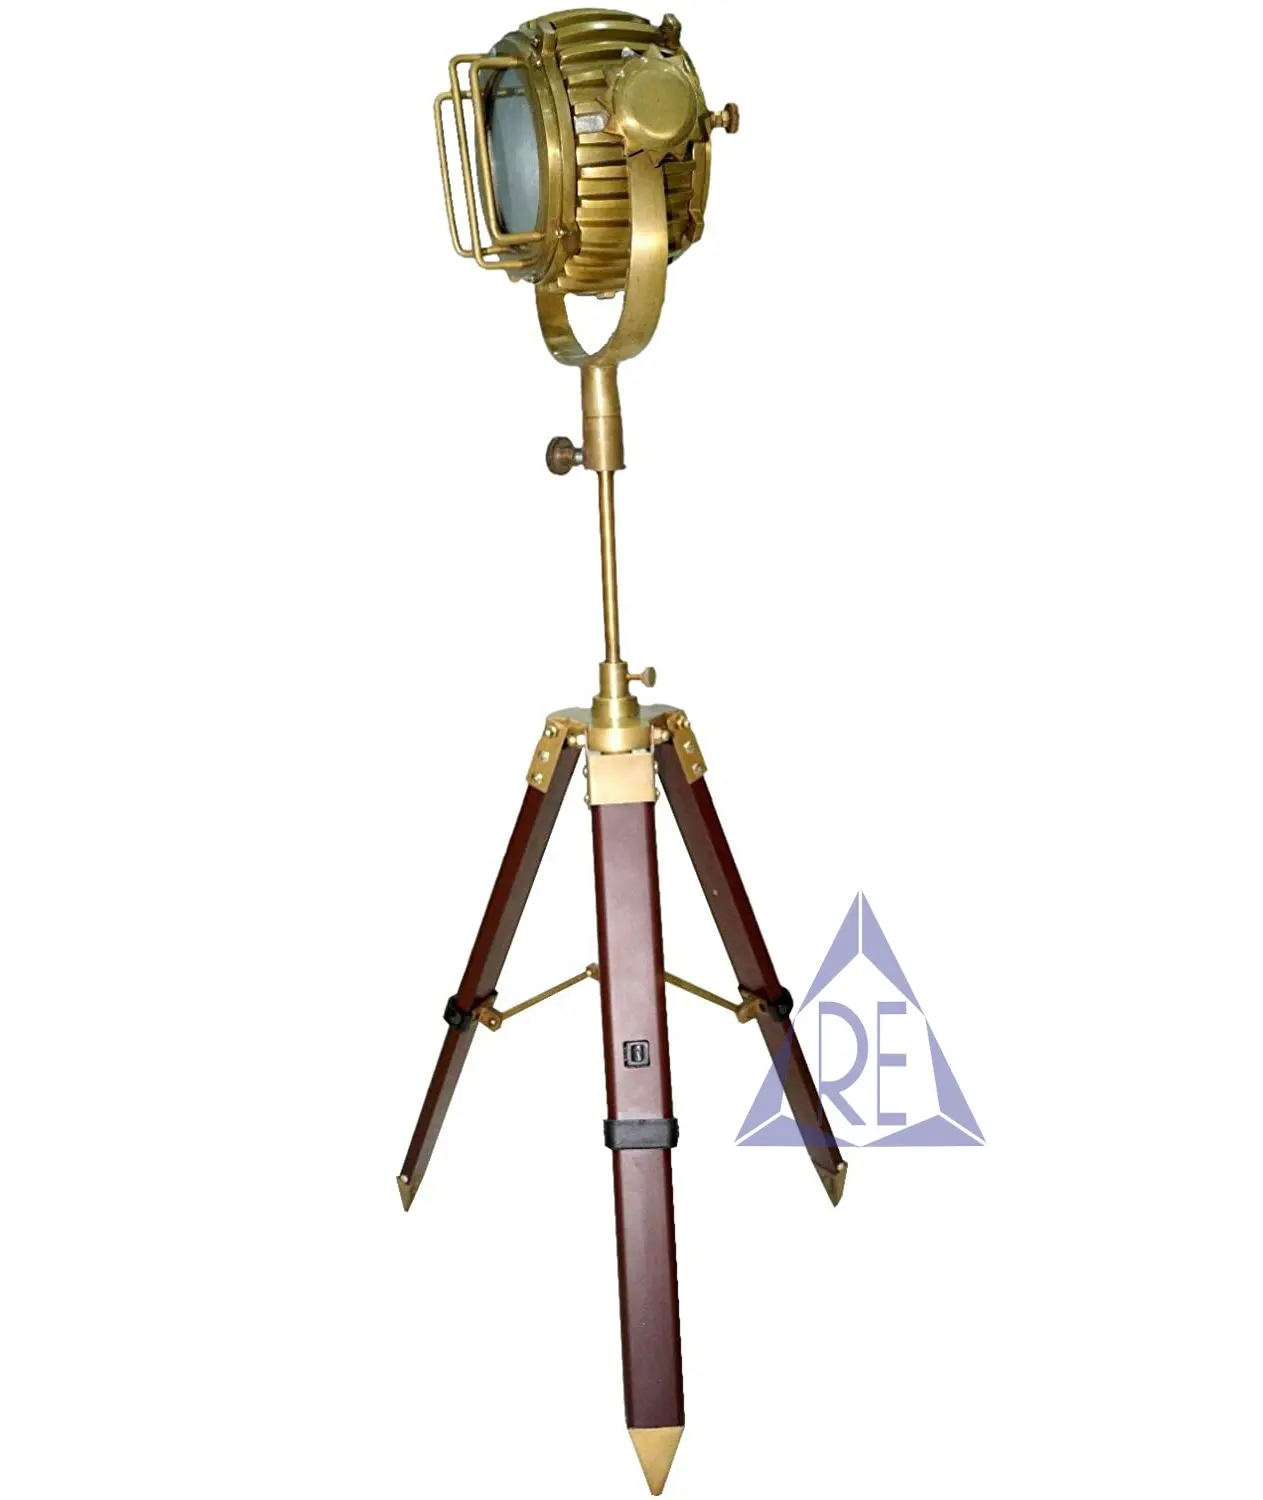 Nautical Brass Designer Style Spot Search Light with Tripod Stand Home & Office Decor Gift Antique Table Spot Light